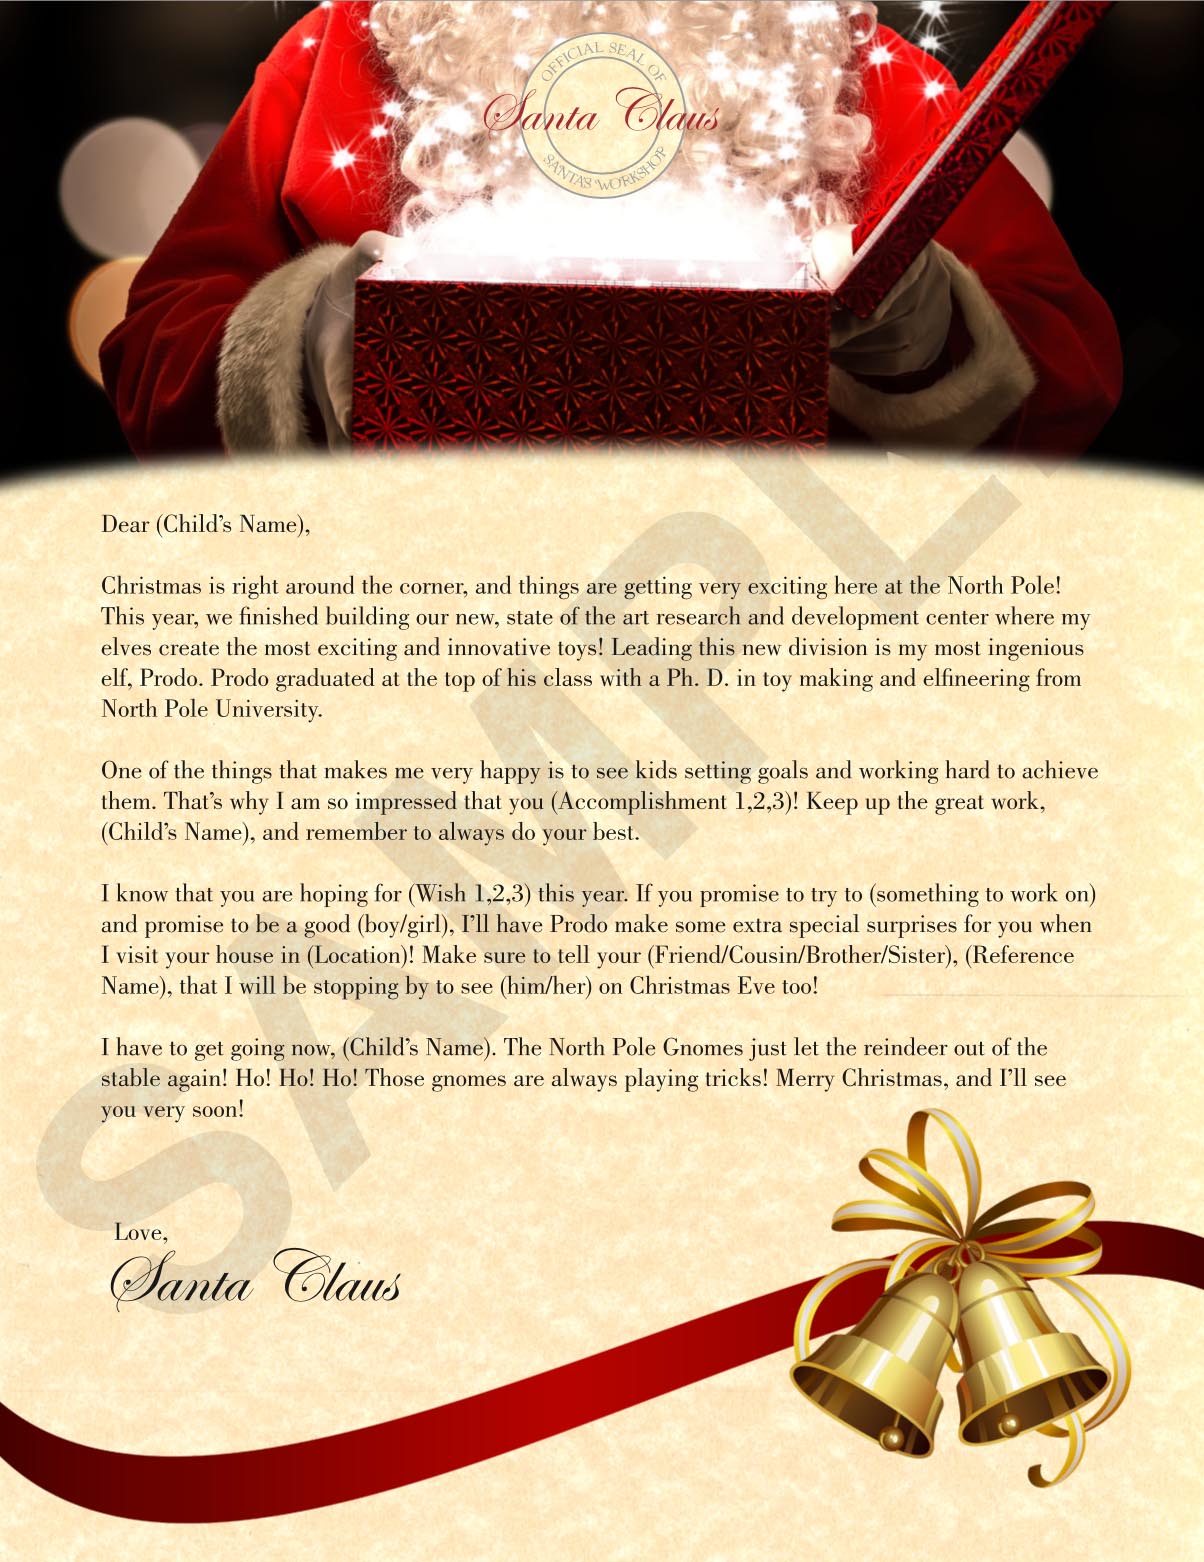 Quick  Easy Santa Letter Templates  Customize  Print for FREE